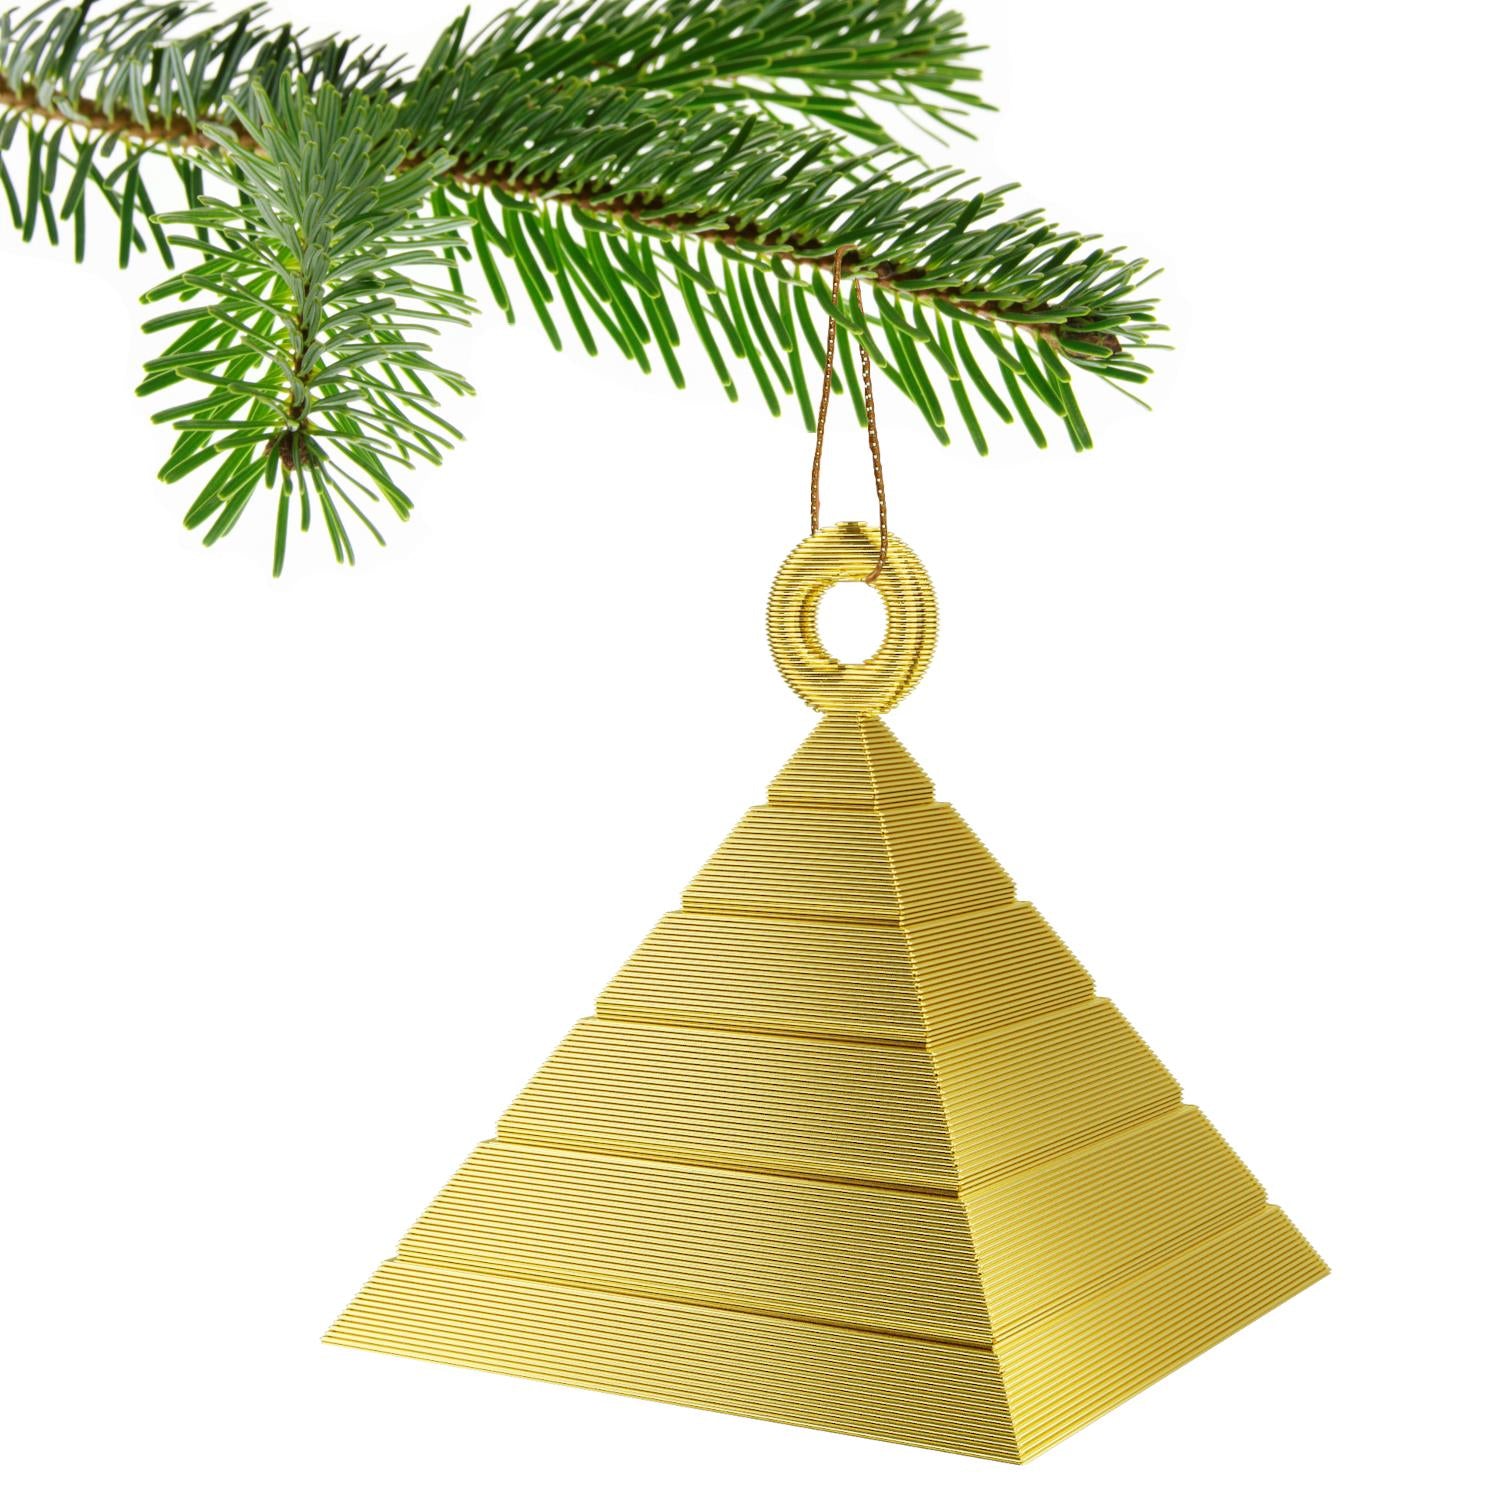 Pyramid Christmas Tree Bauble Decoration Ornament For Christmas Xmas Noel (Gold)